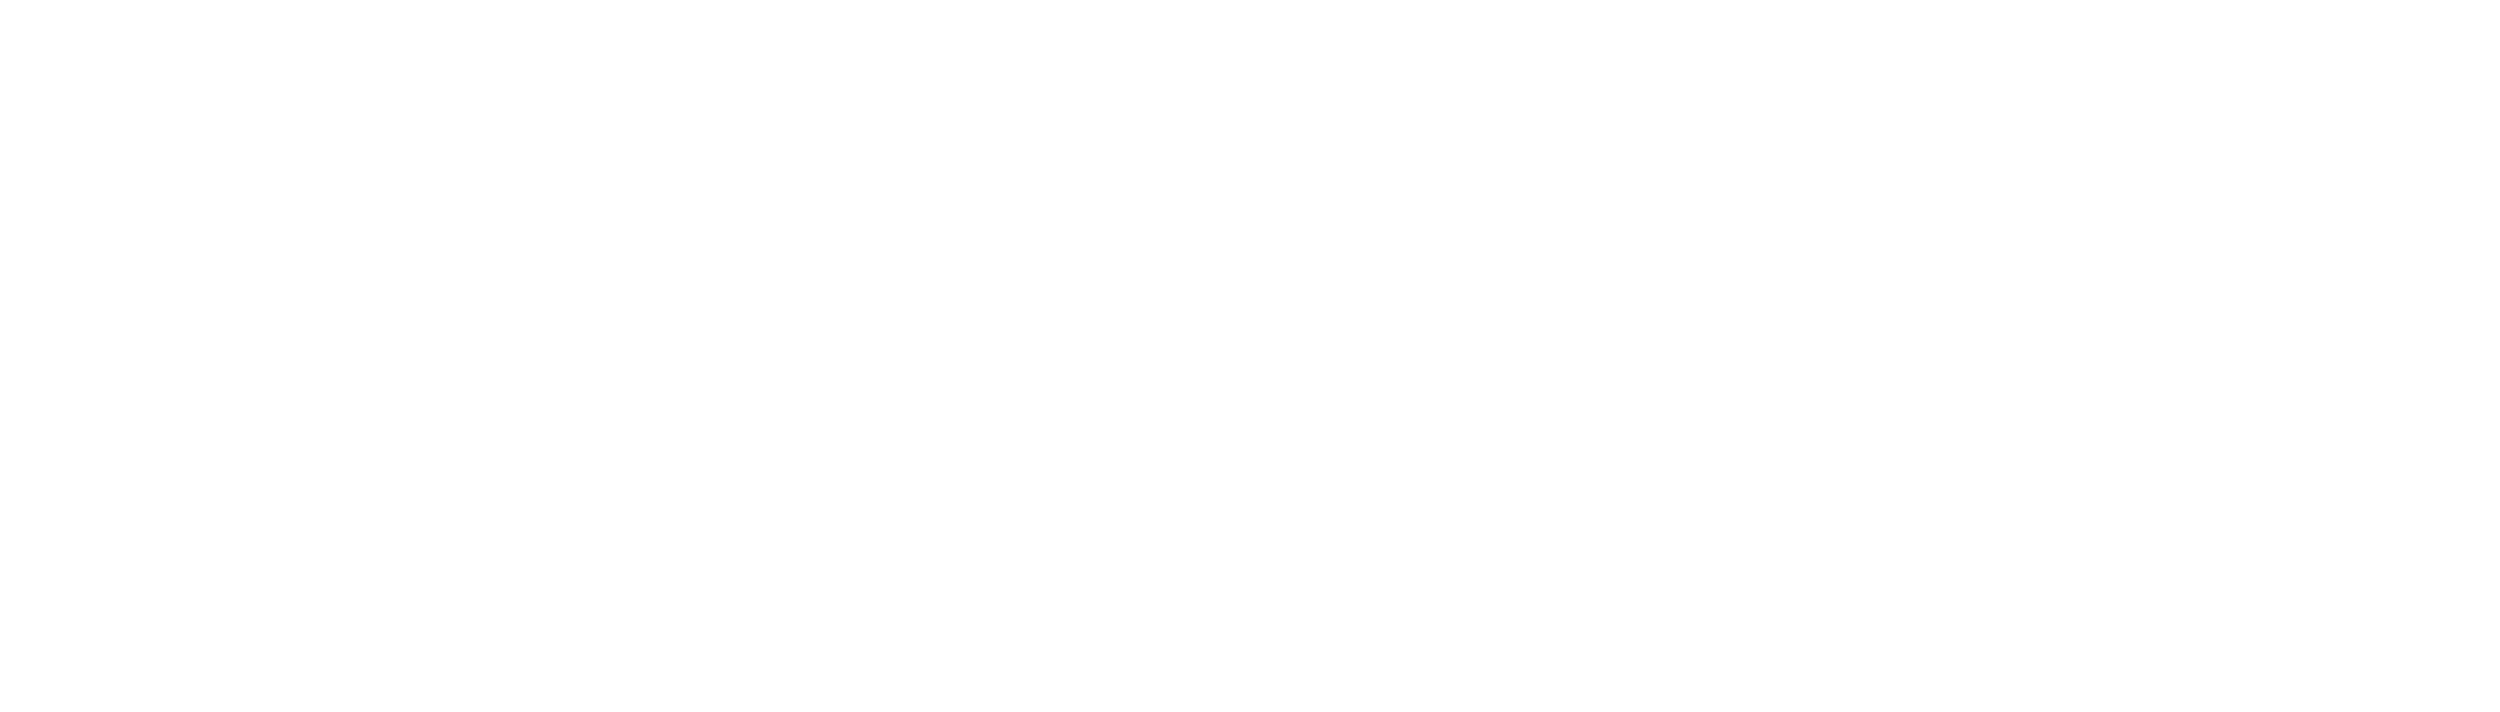 Financial wellbeing group